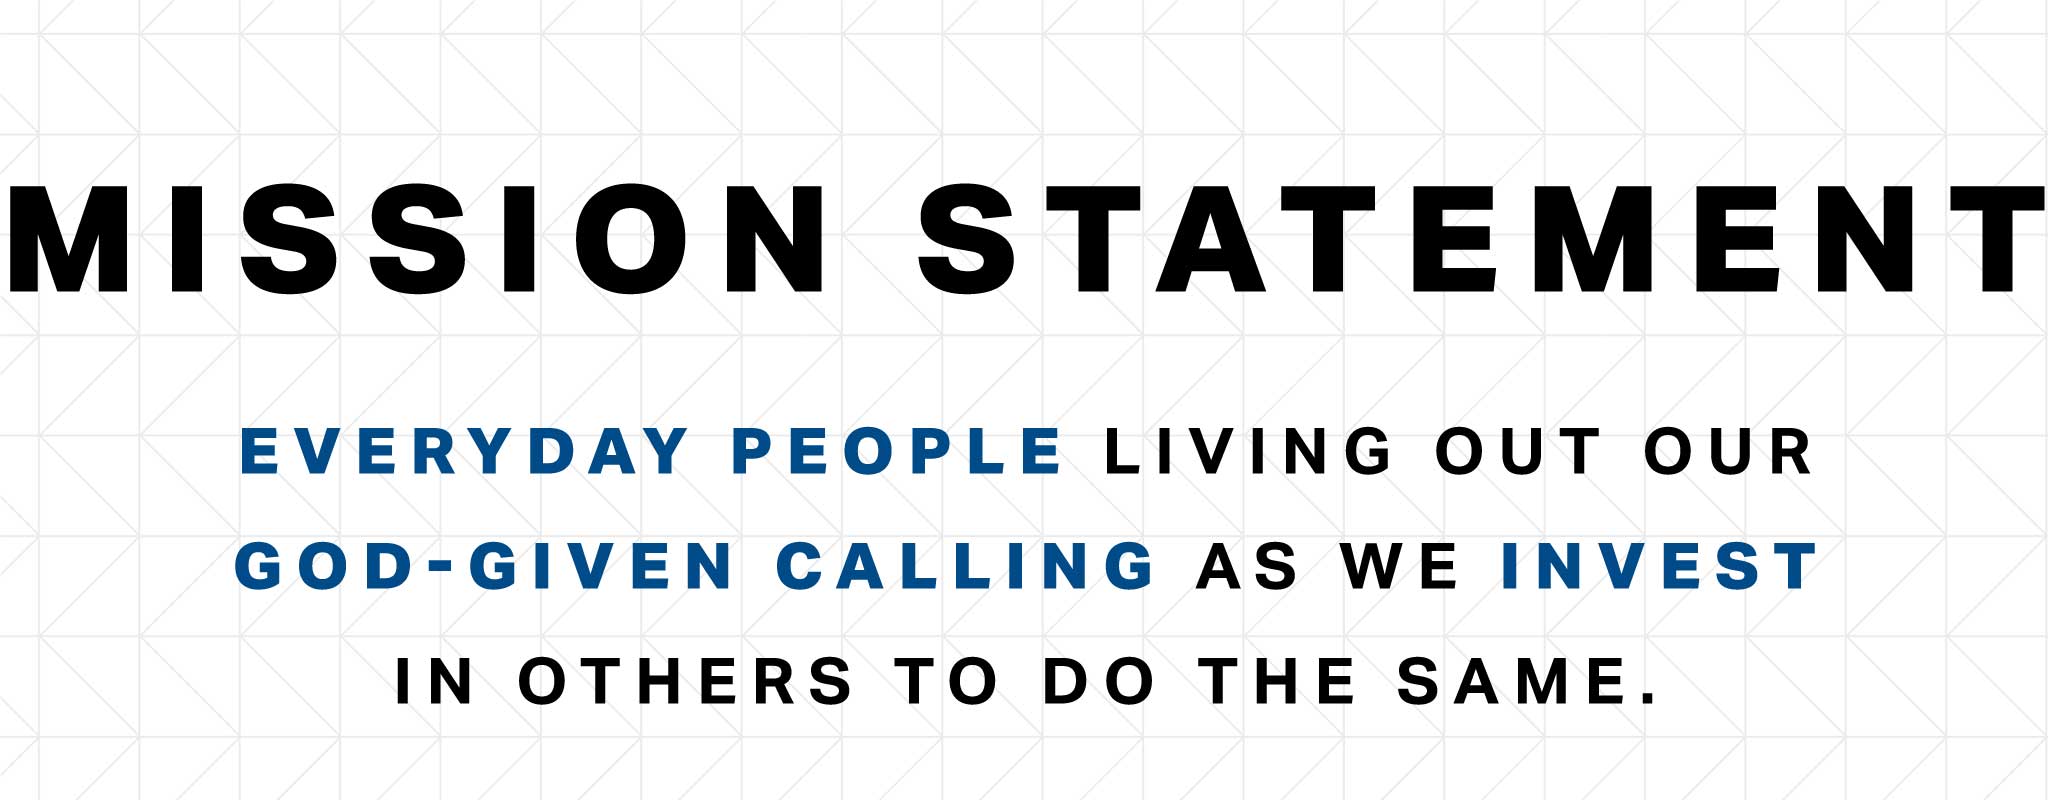 New mission statement, same church: Everyday people living out our God-given calling as we invest in others to do the same.